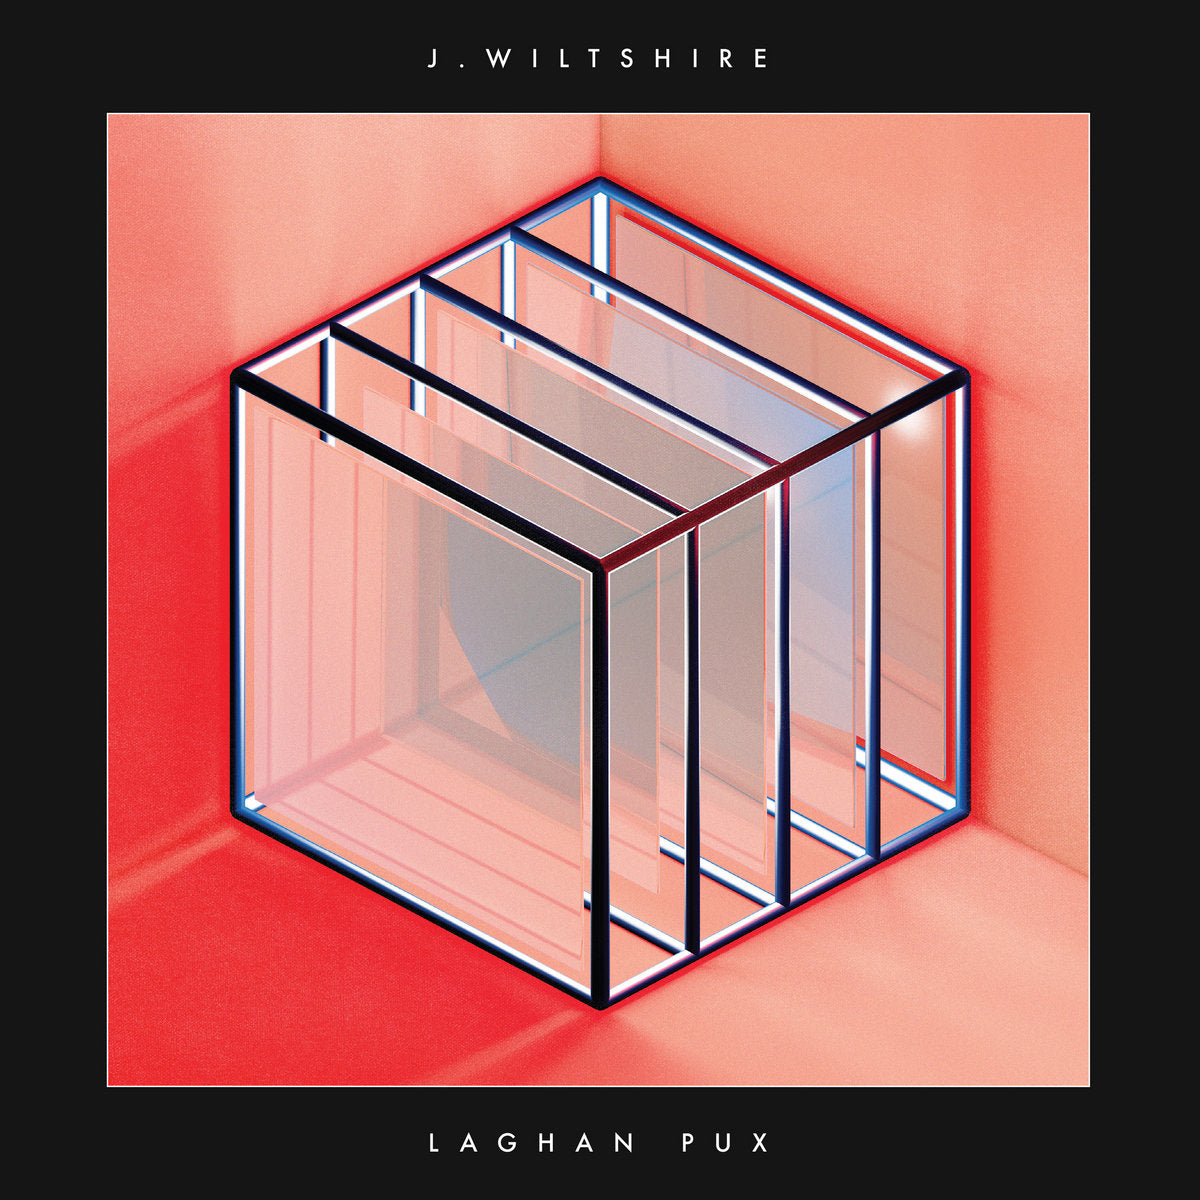 J. Wiltshire – Laghan Pux